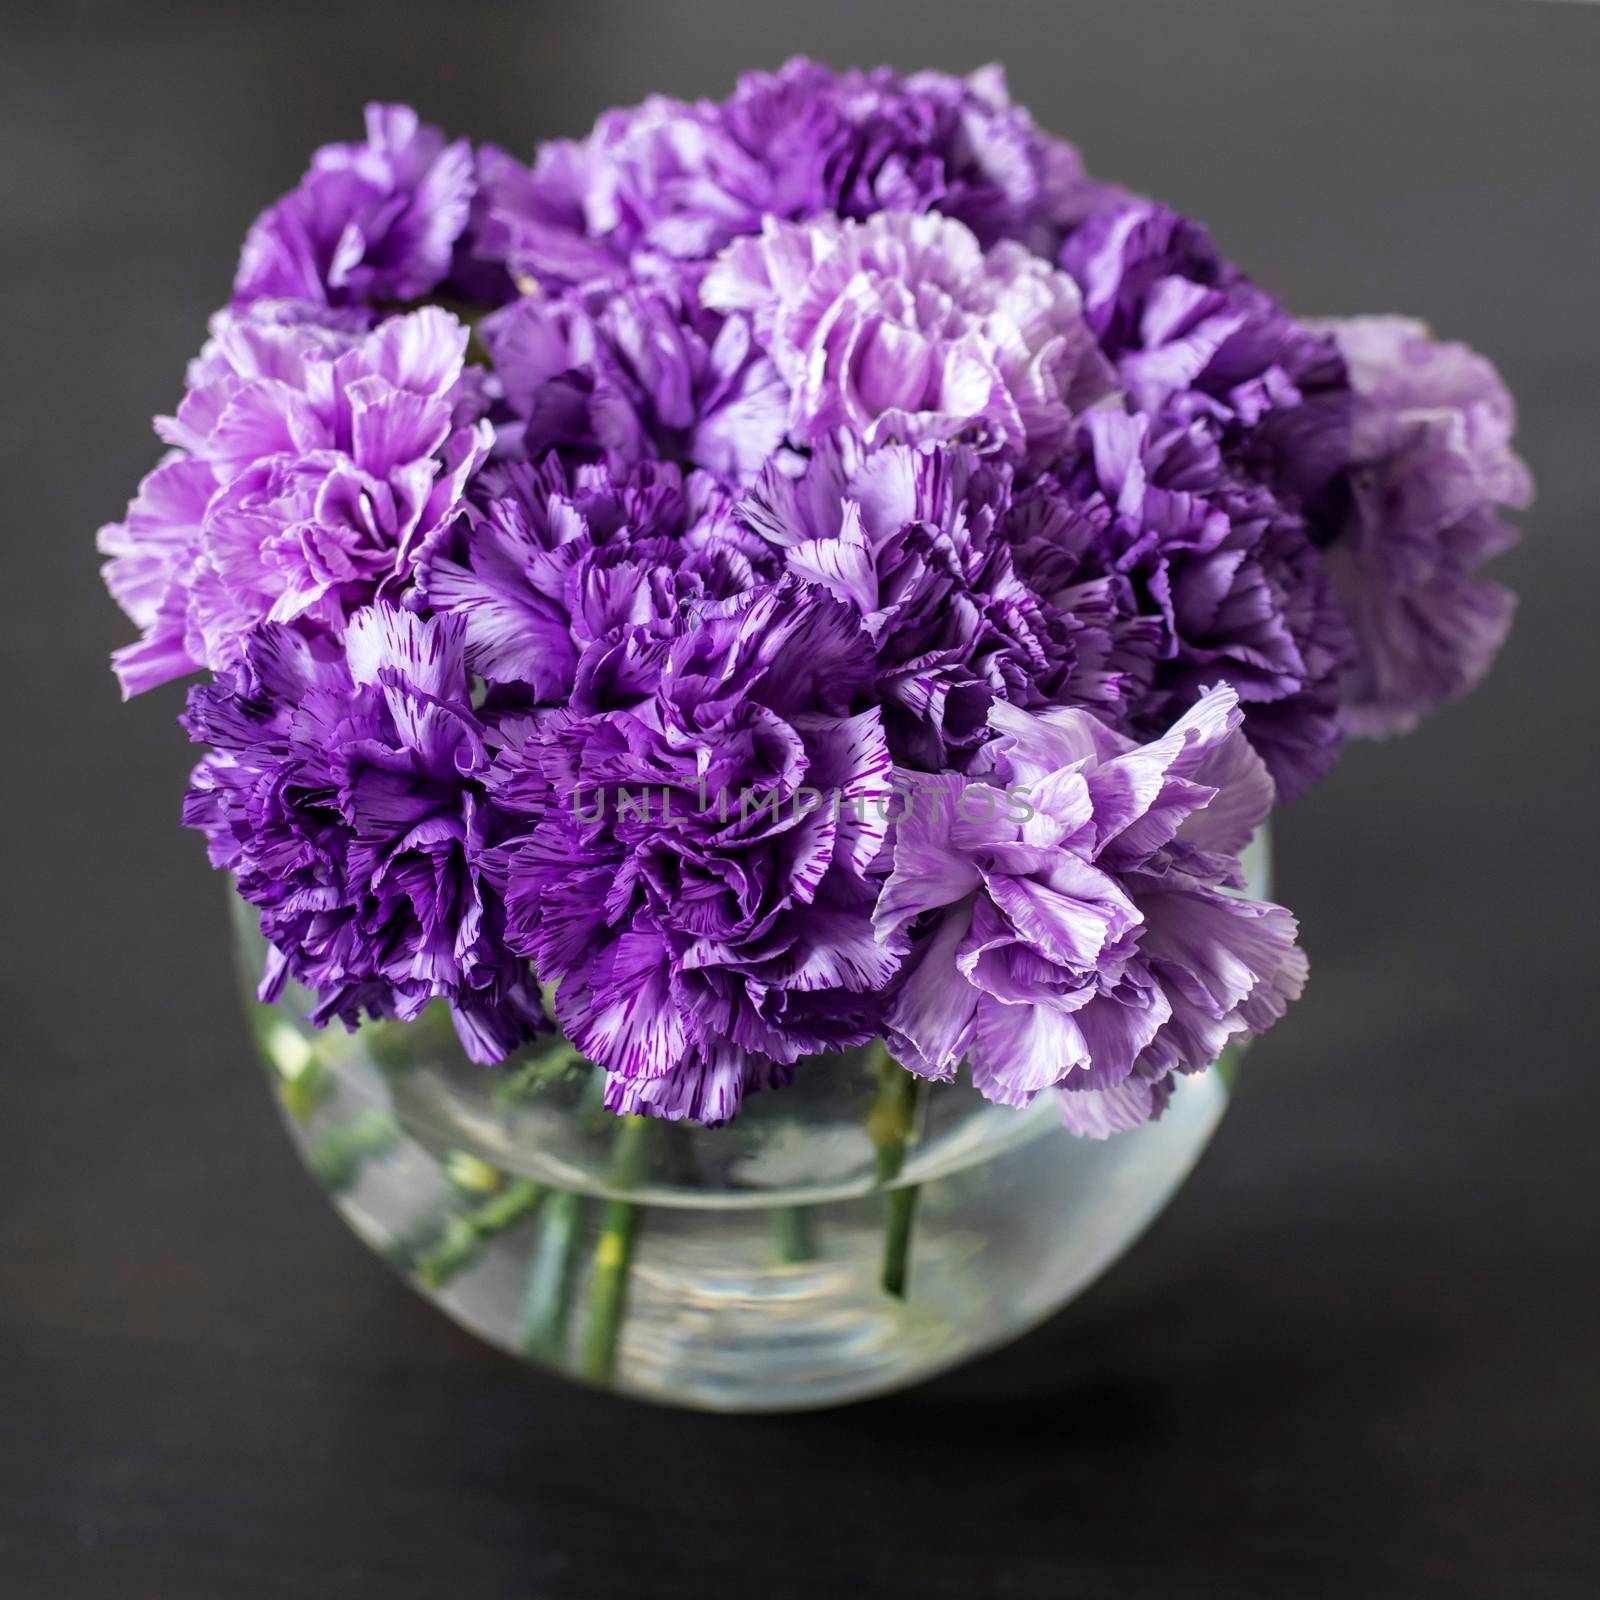 Bridal bouquet of lilac carnations in a round glass vase as table decoration